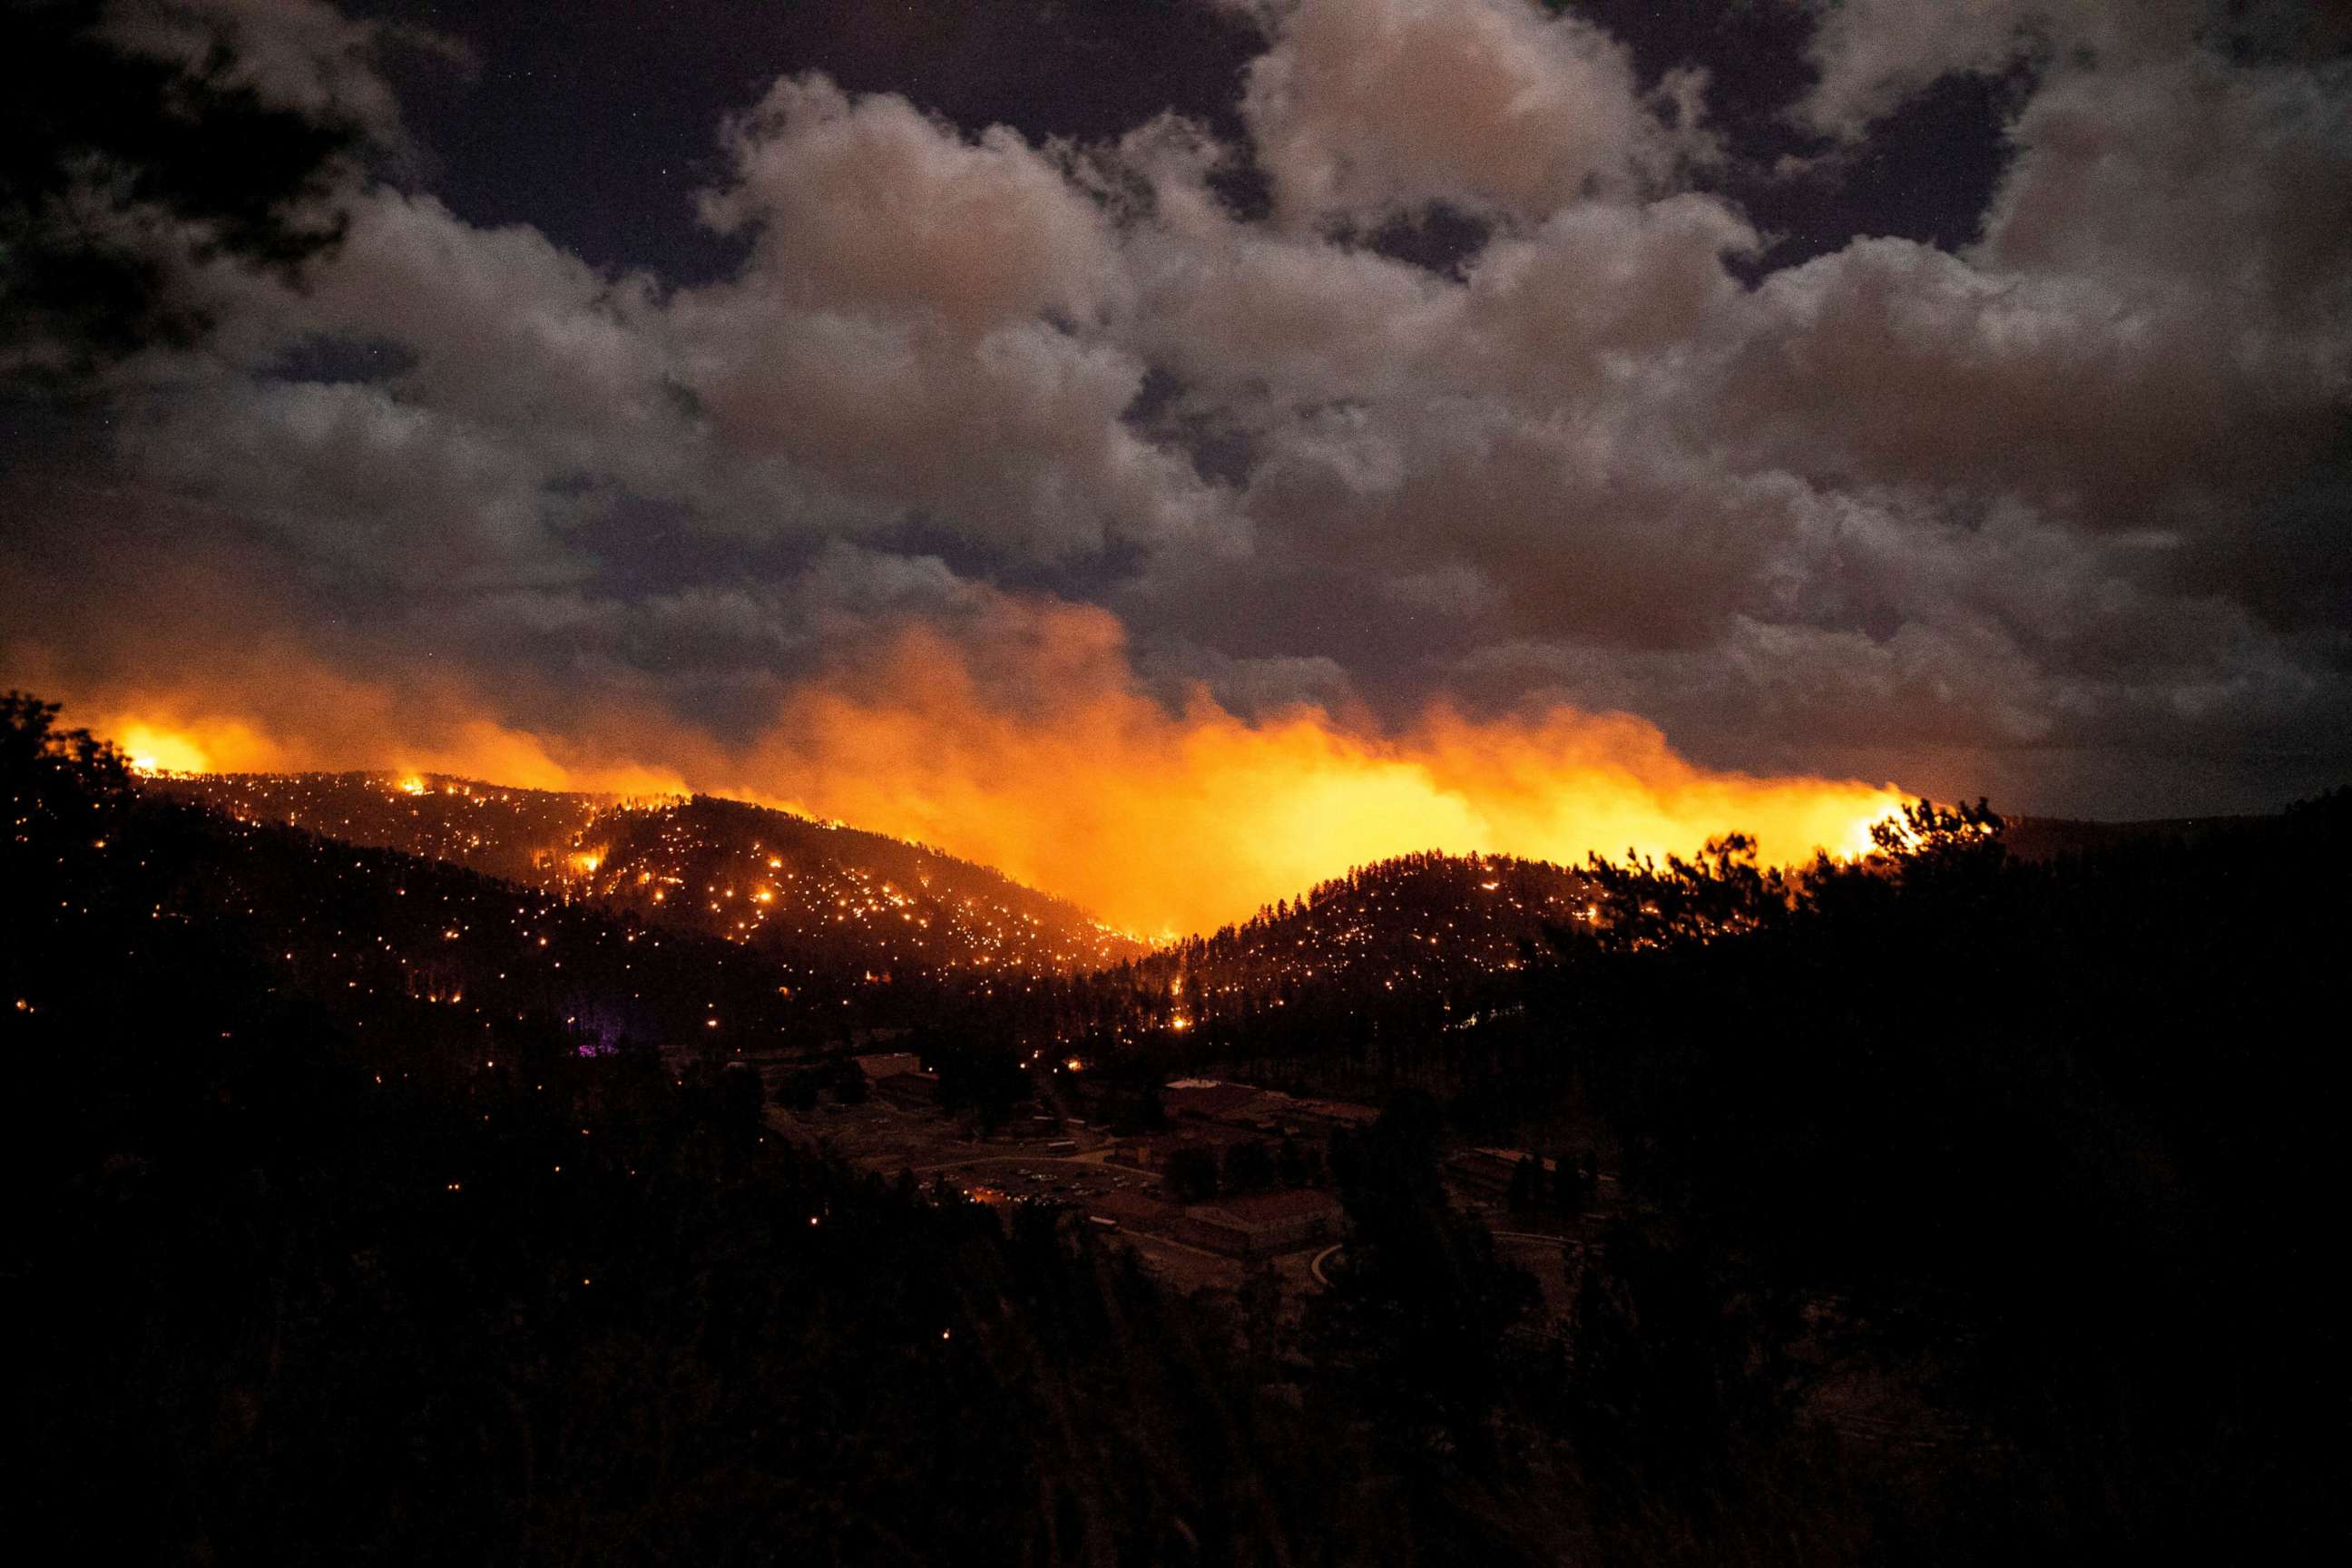 3 dead after severe storm system, wildfires rip through US ABC News